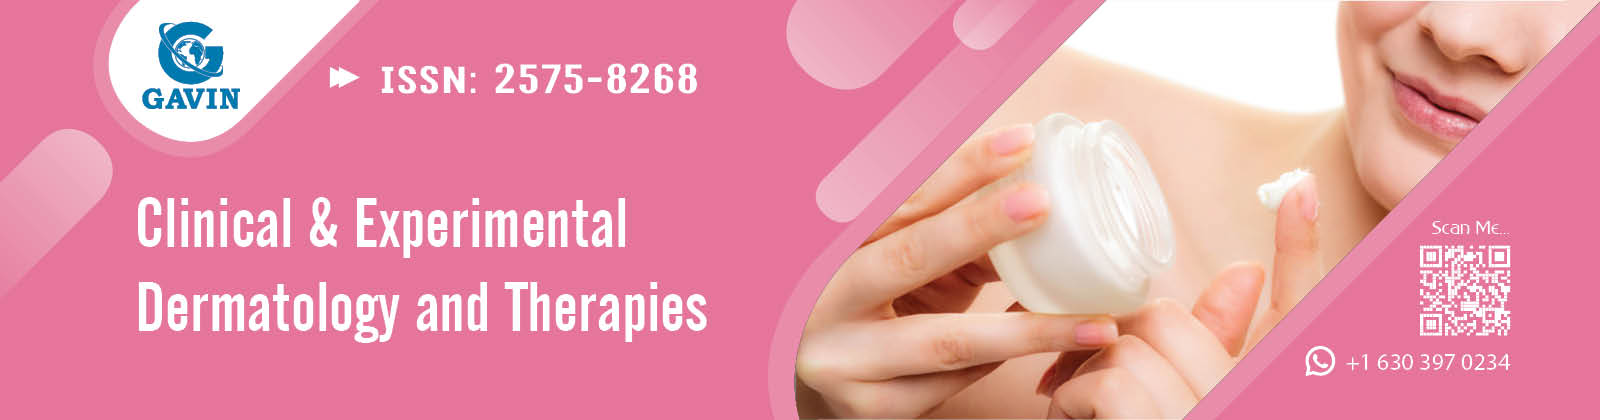 Clinical & Experimental Dermatology and Therapies